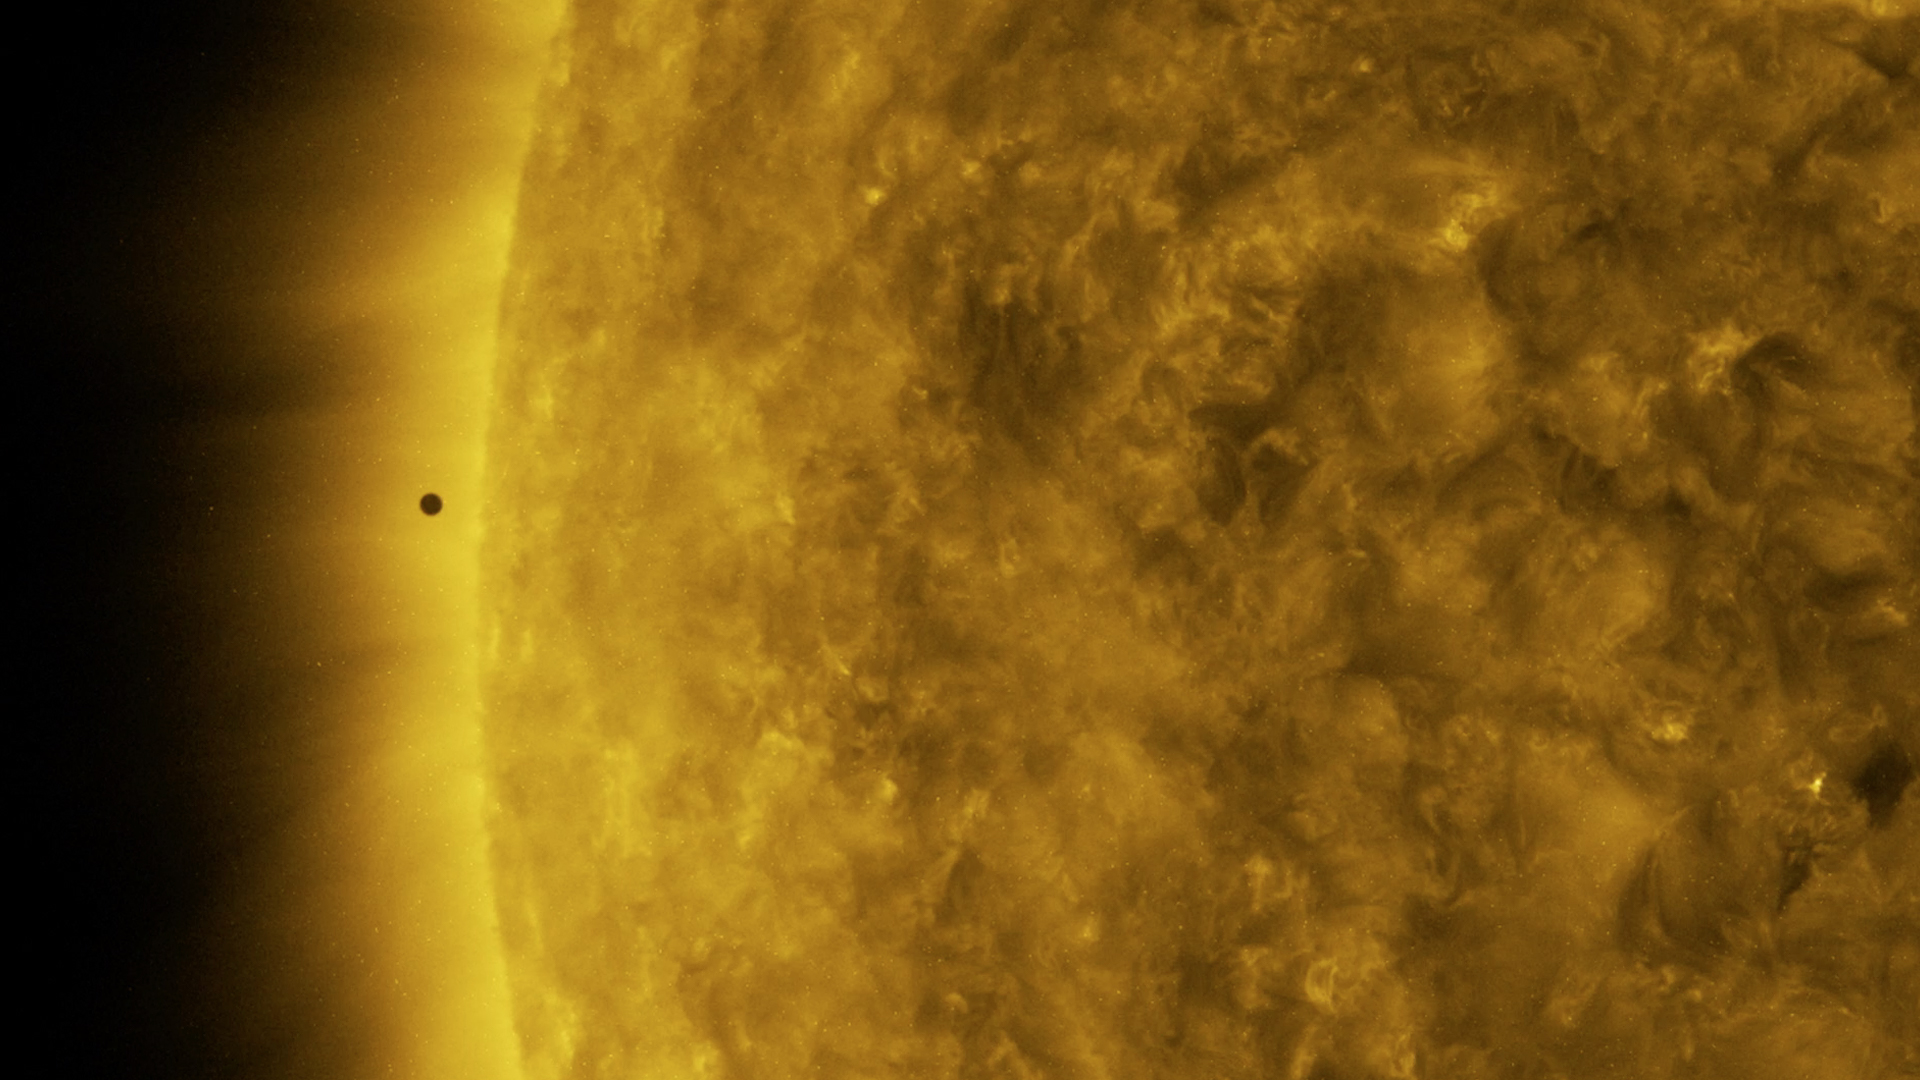 Preview Image for Mercury Transit 2019 - 4K